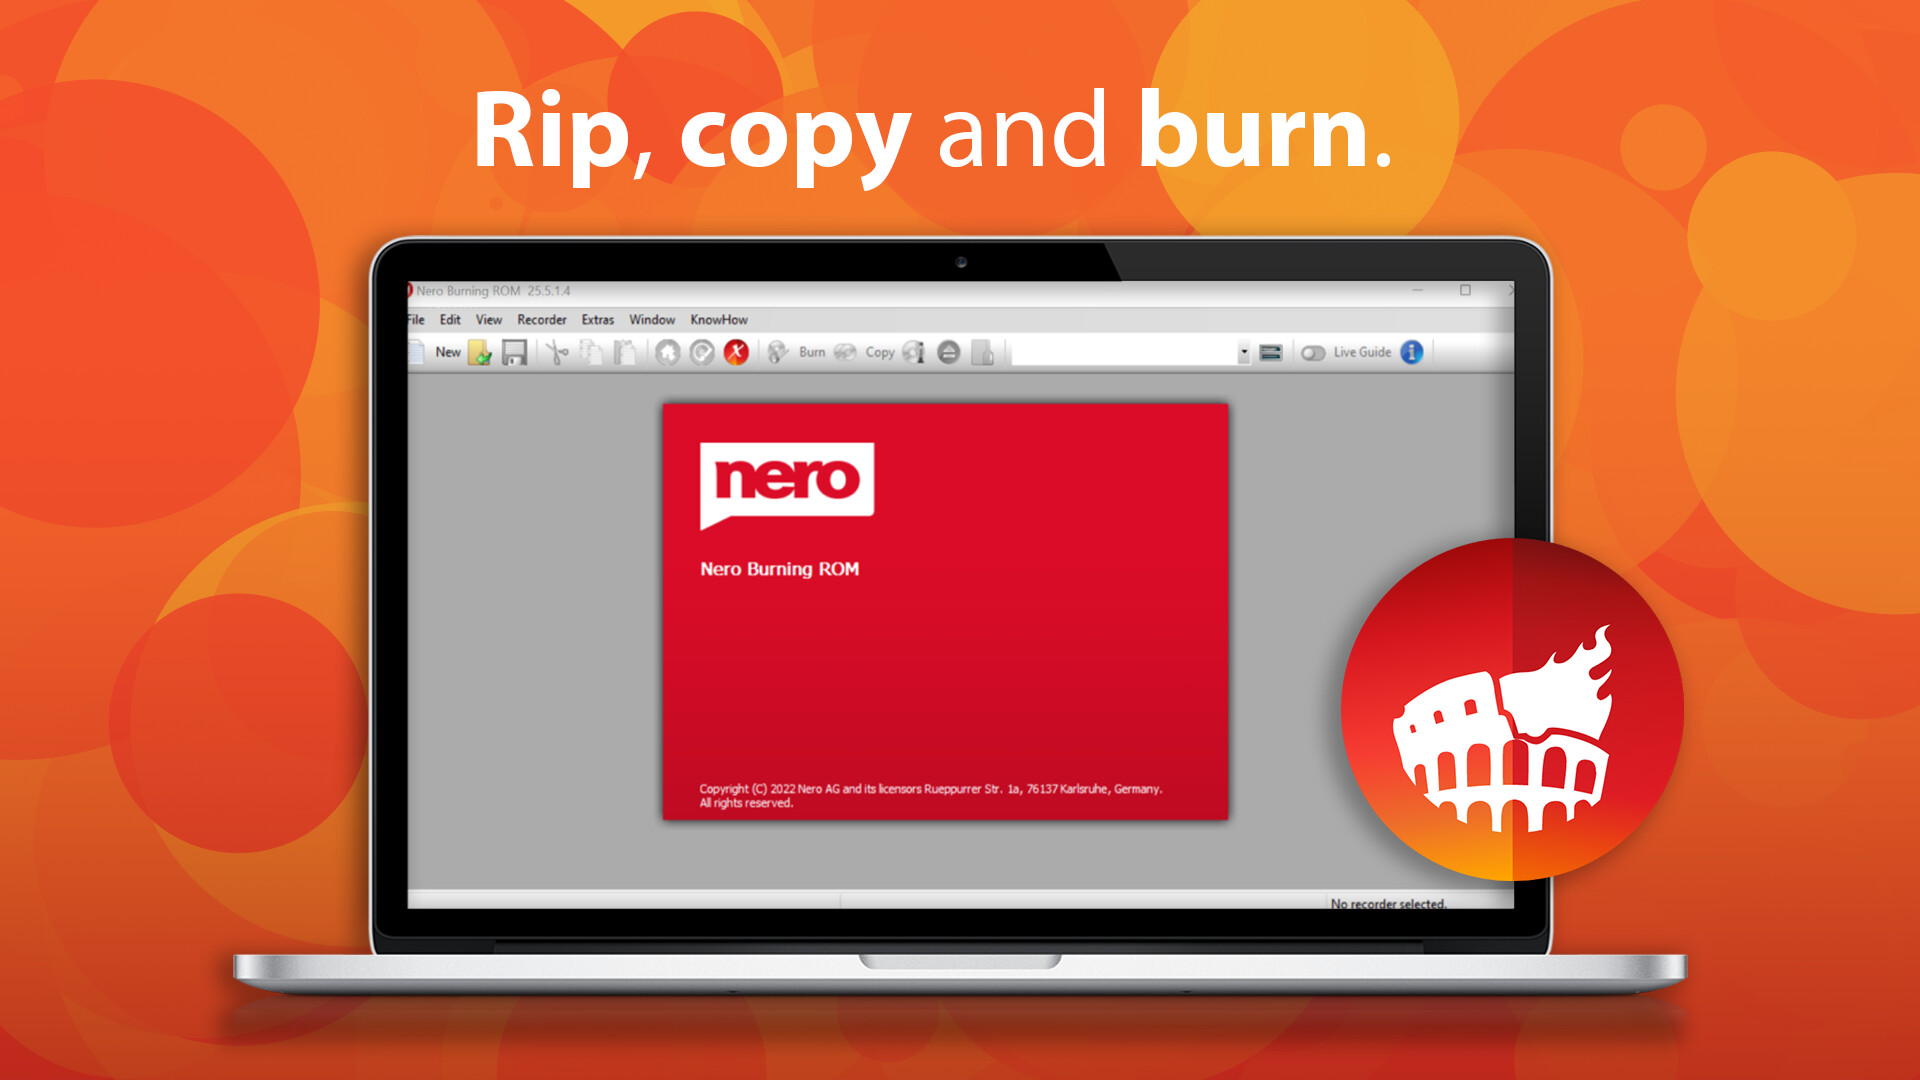 Save 60% on Nero Burning ROM - All-in-One Disc Burn Solution on Steam